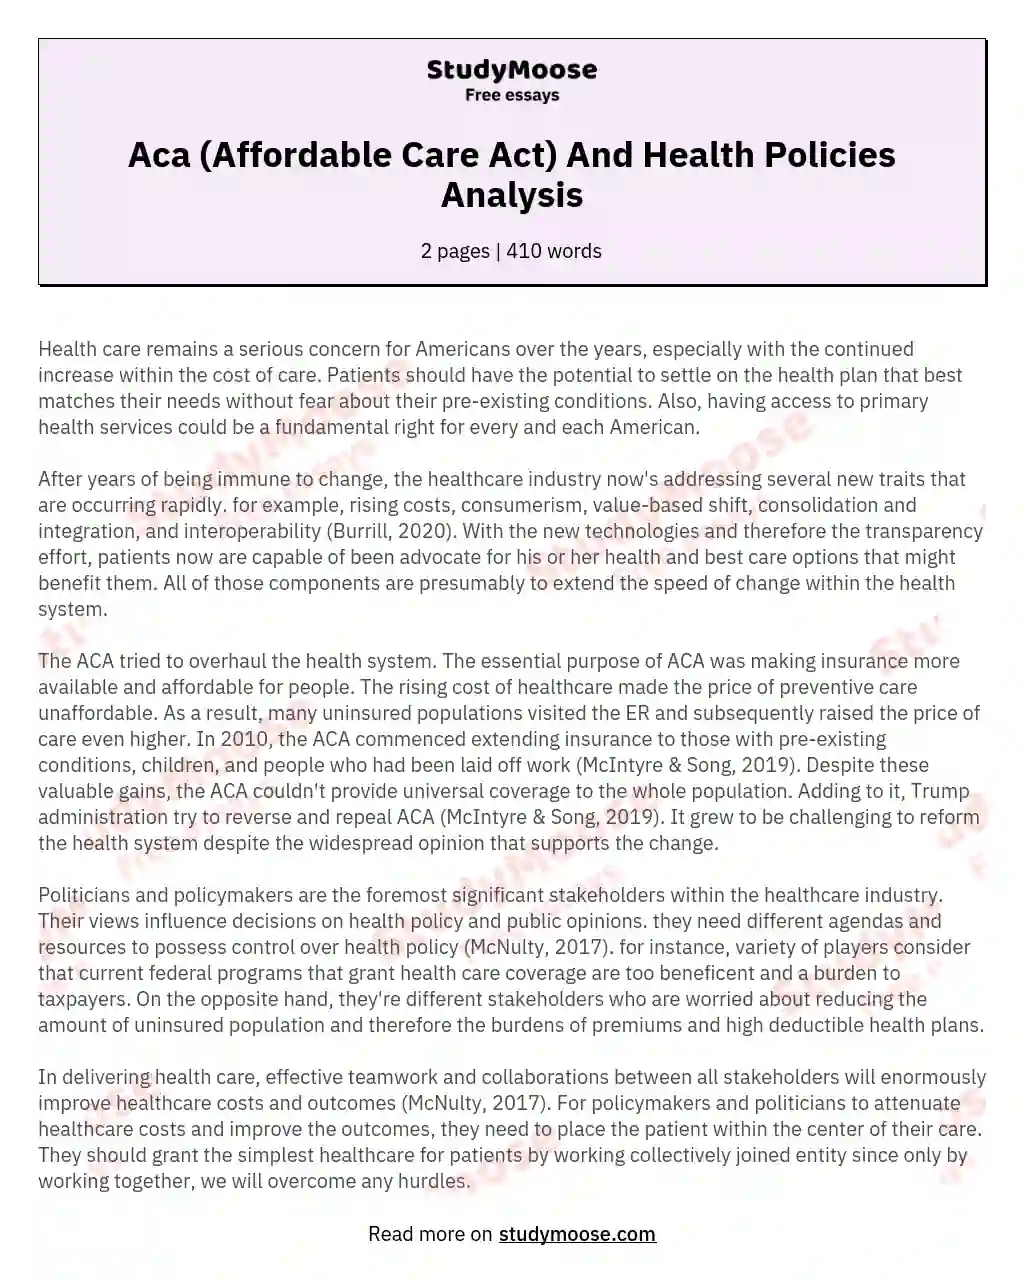 Aca (Affordable Care Act) And Health Policies Analysis essay